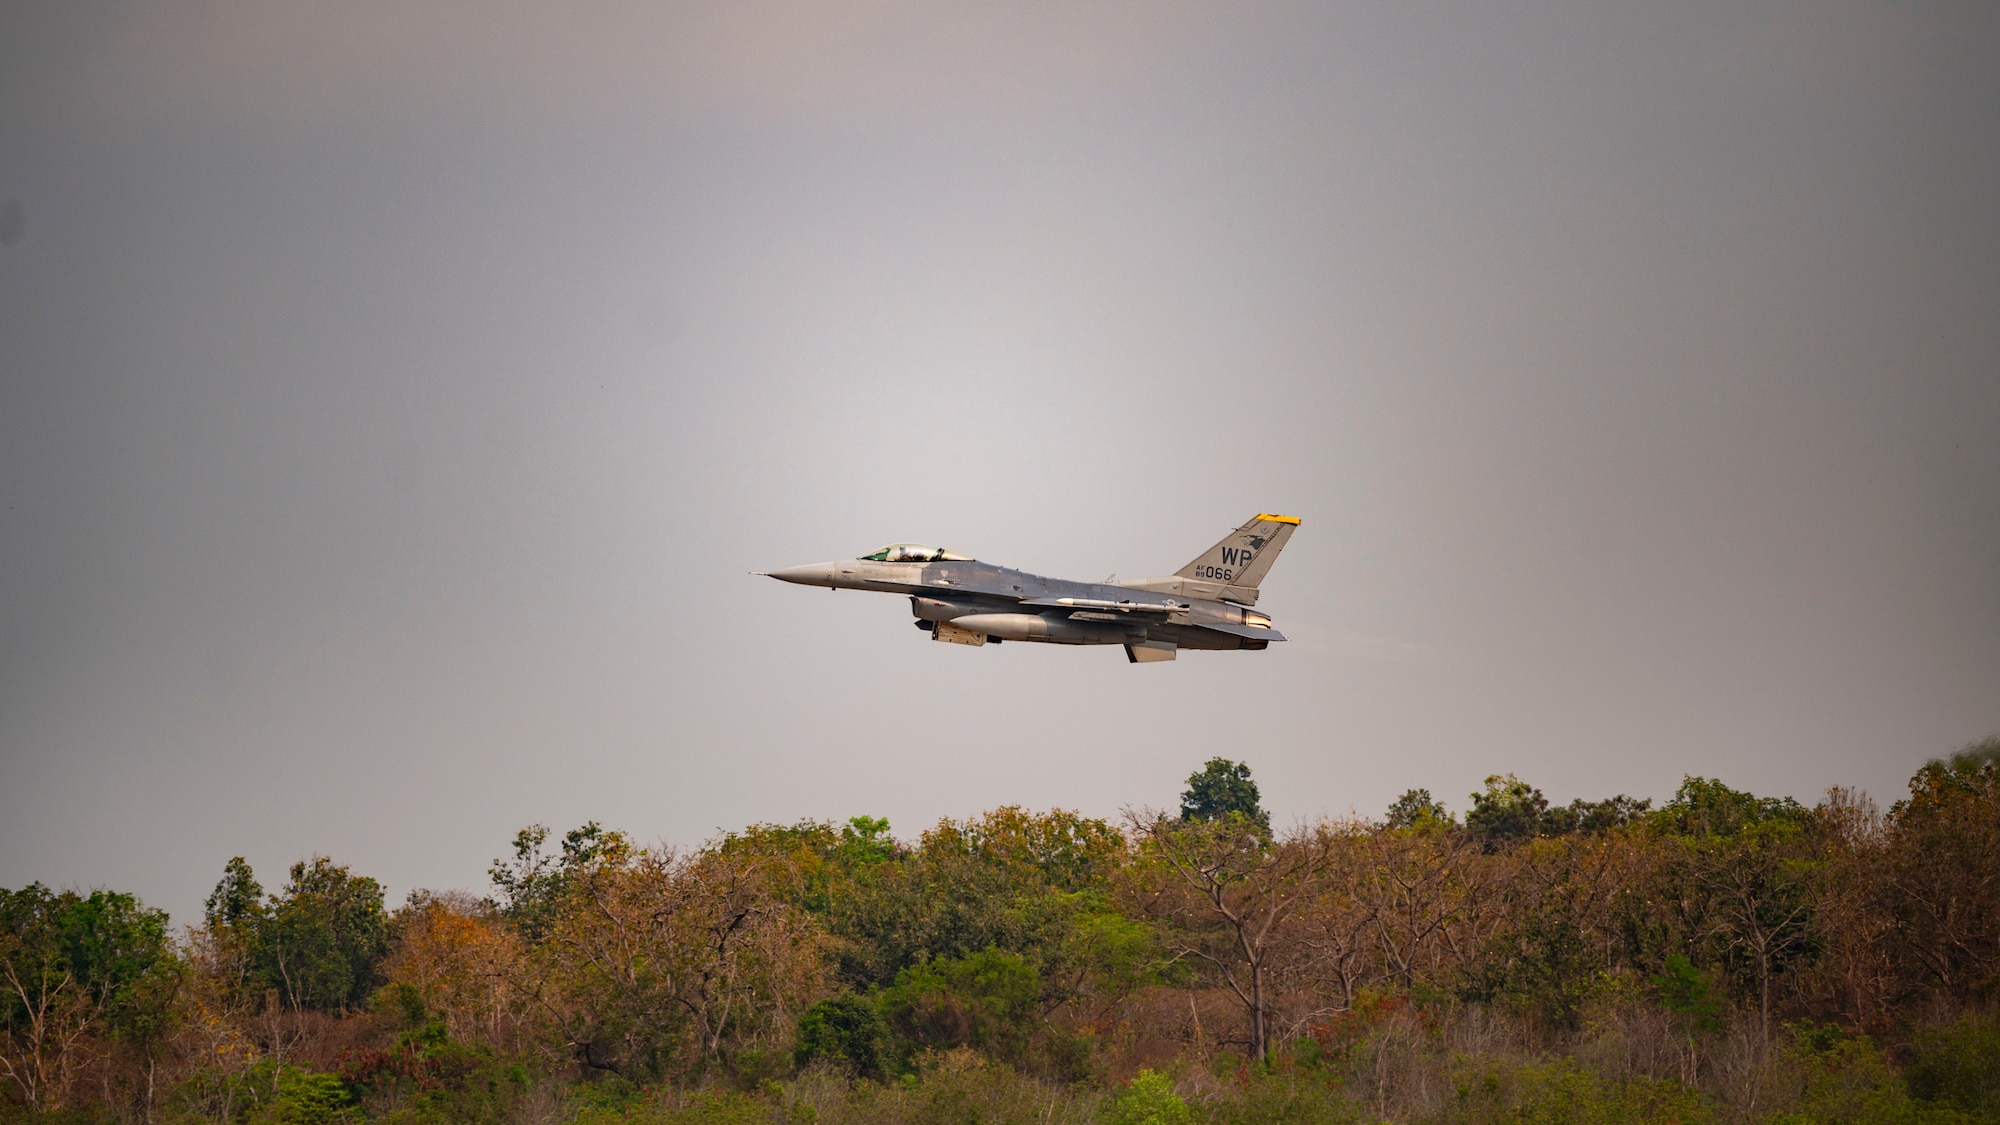 An F-16 Fighting Falcon takes off to participate in an amphibious assault scenario